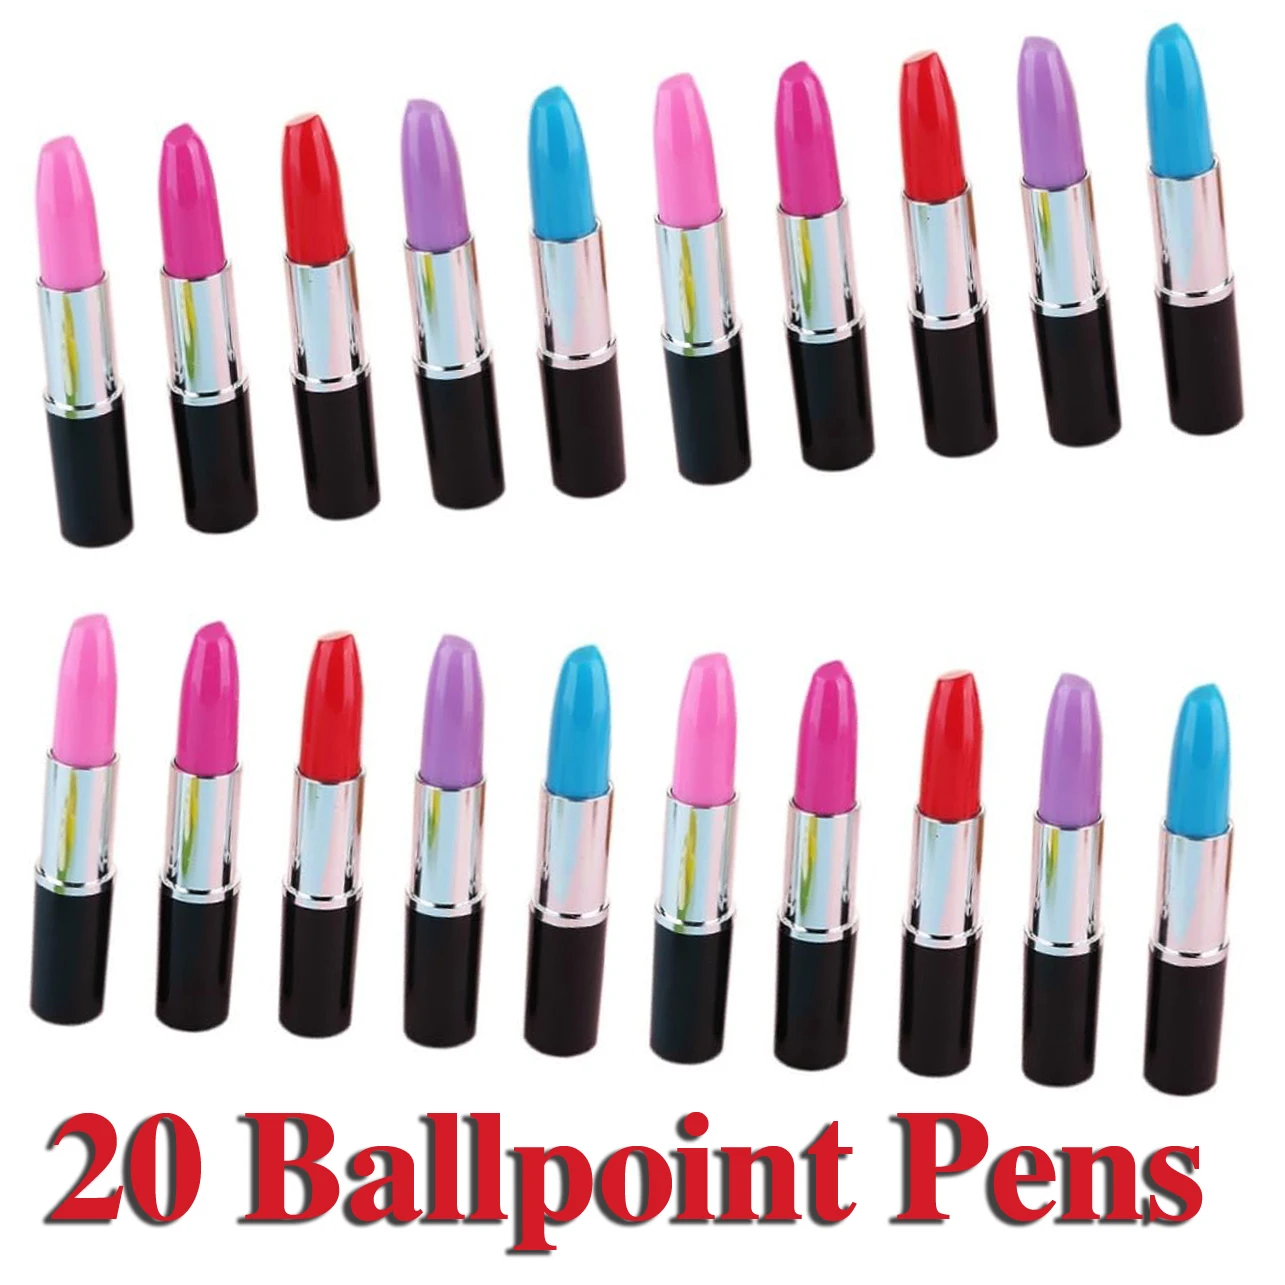 20pcs Lipstick Ball-Point Pen Creative Beautiful Ball-Point Pen Lipstick Sign Pen Girl Gift for Home Store School beer bar neon sign led neon lights for wall decor light up bar signs for home bar cart restaurant man cave cafe club party neon